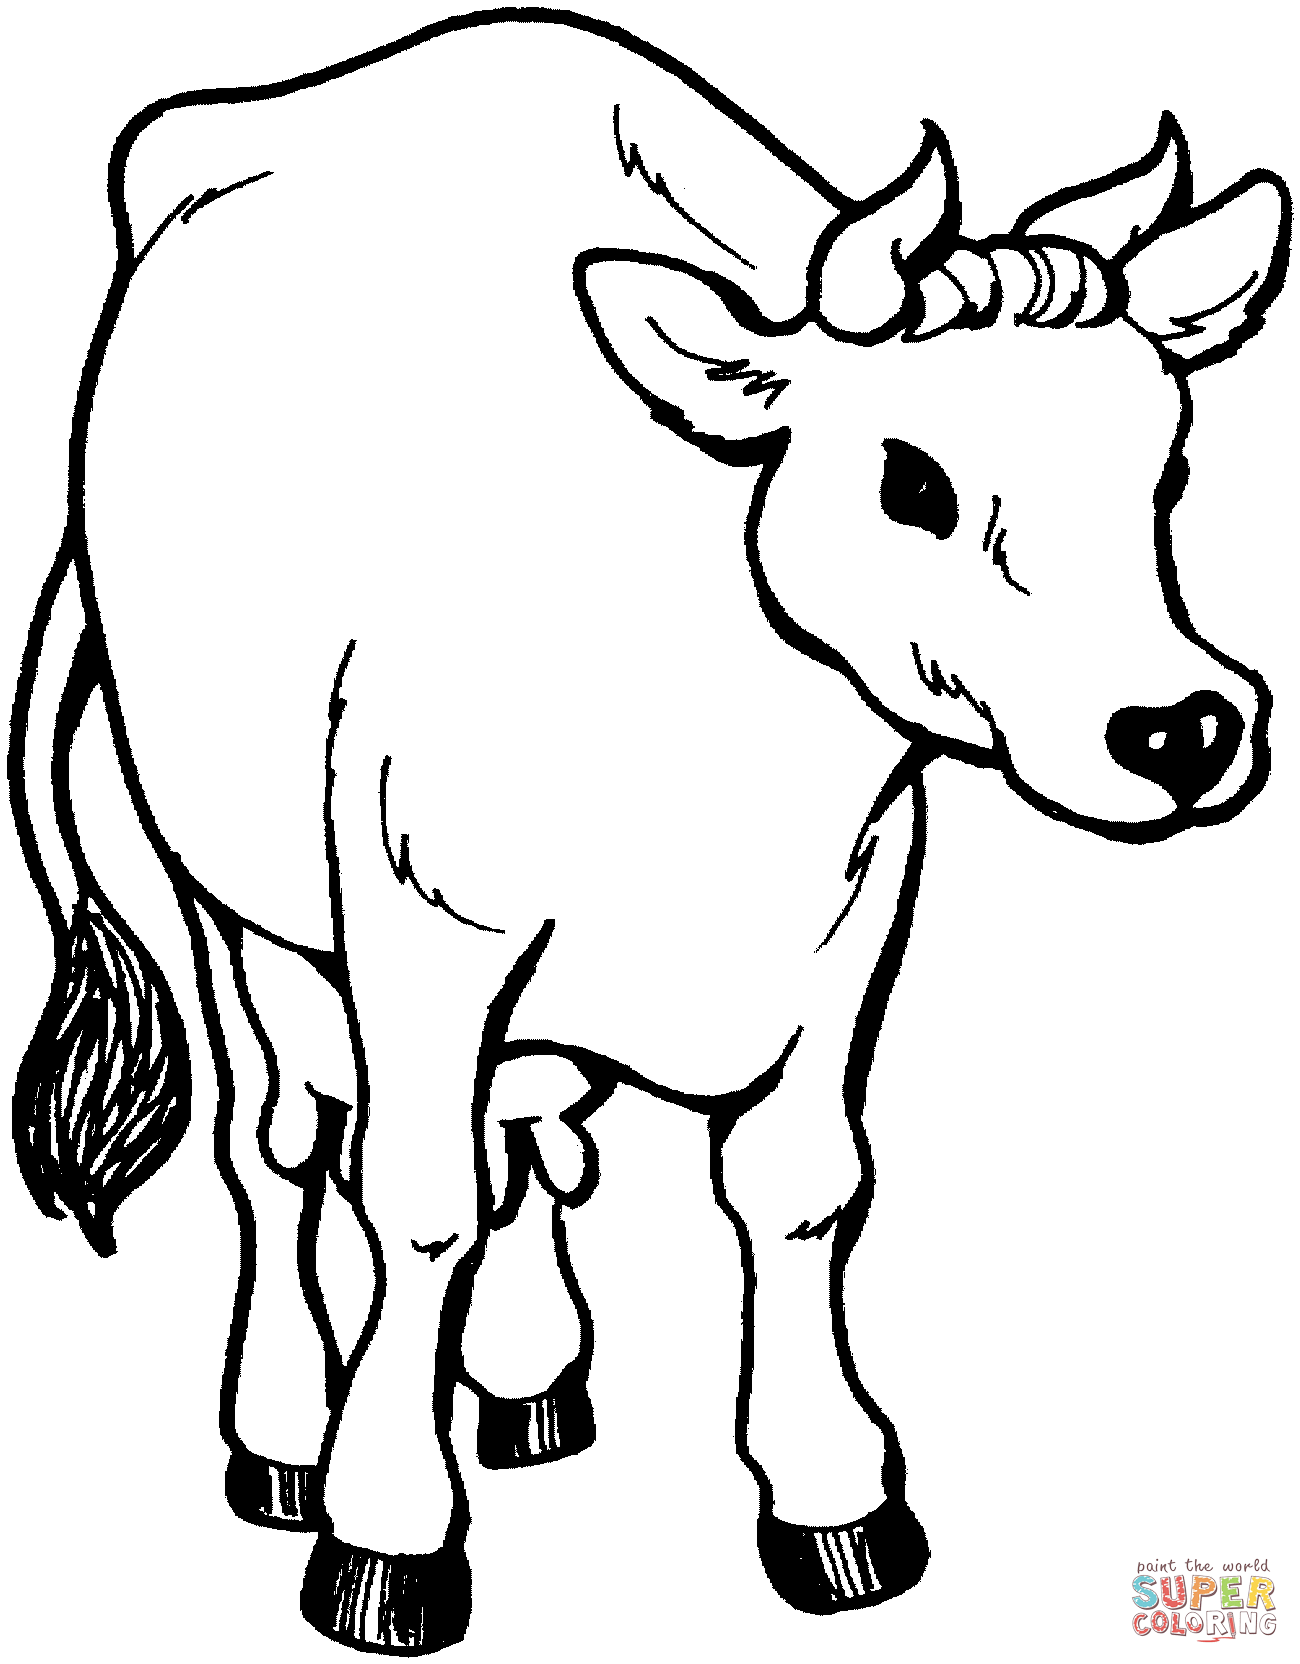 free-cow-printable-coloring-pages-download-free-cow-printable-coloring